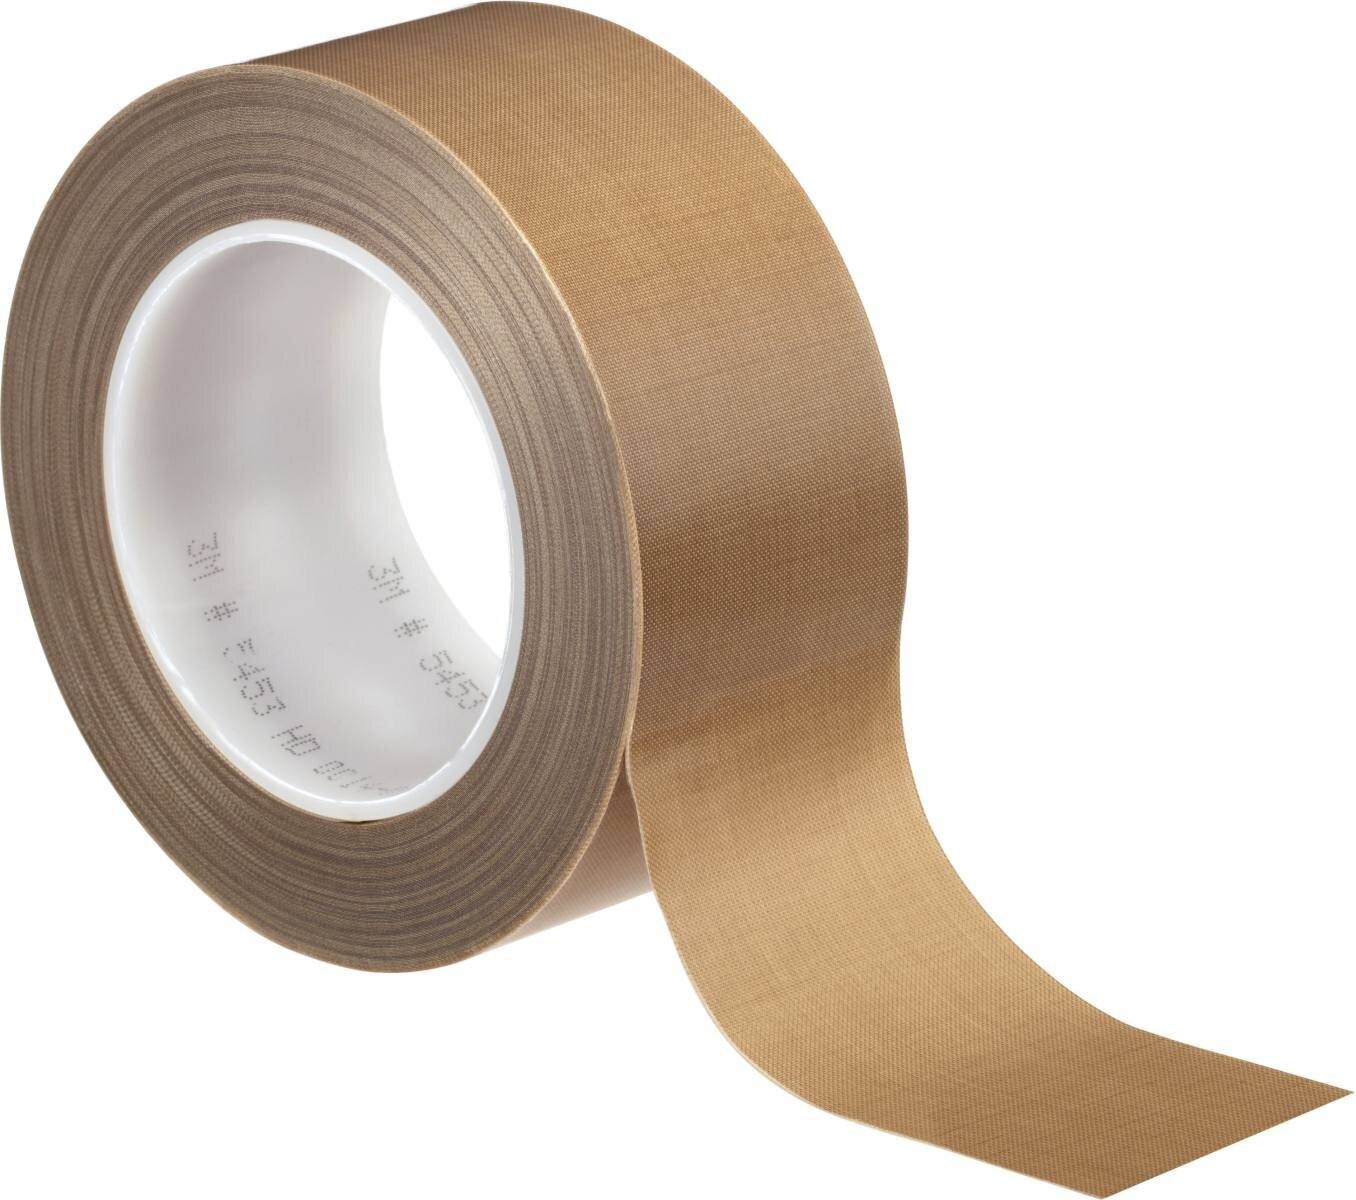 3M 5453 PTFE glass adhesive tape 254mmx33m, 0.22mm, silicone